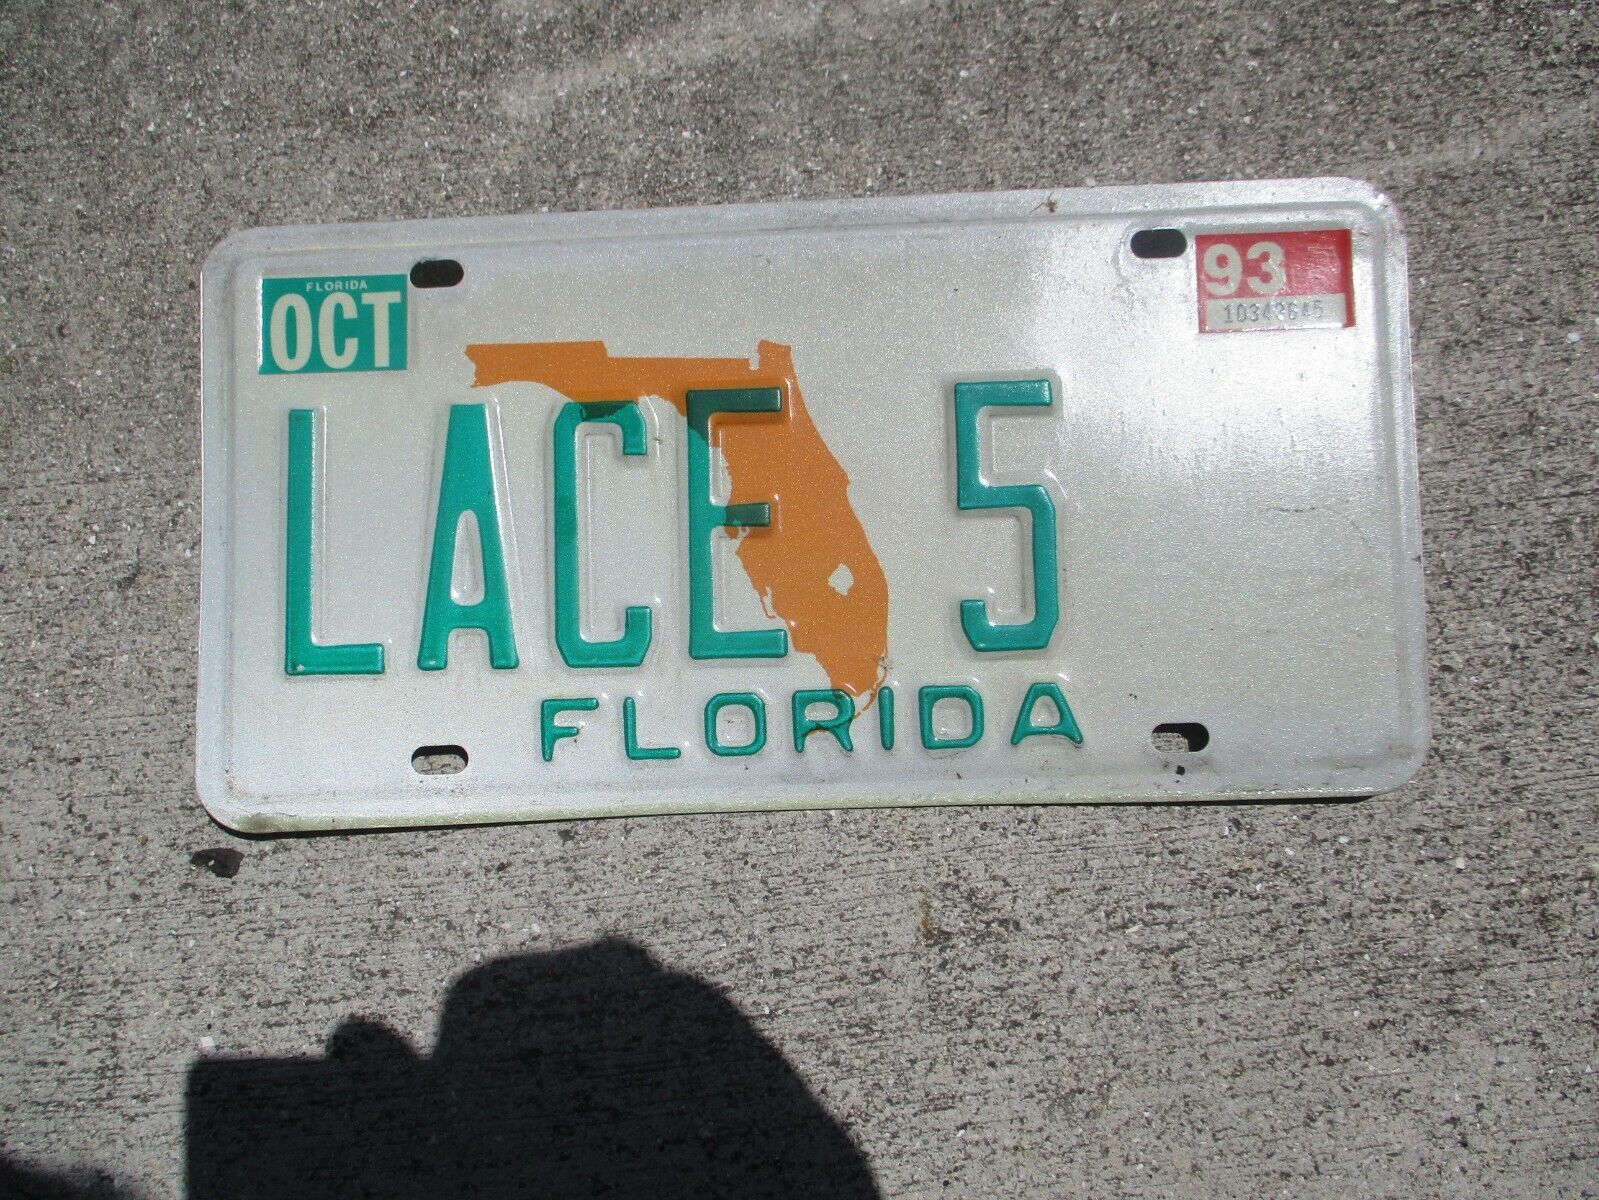 Florida 1993 vanity license plate  #   LACE  5